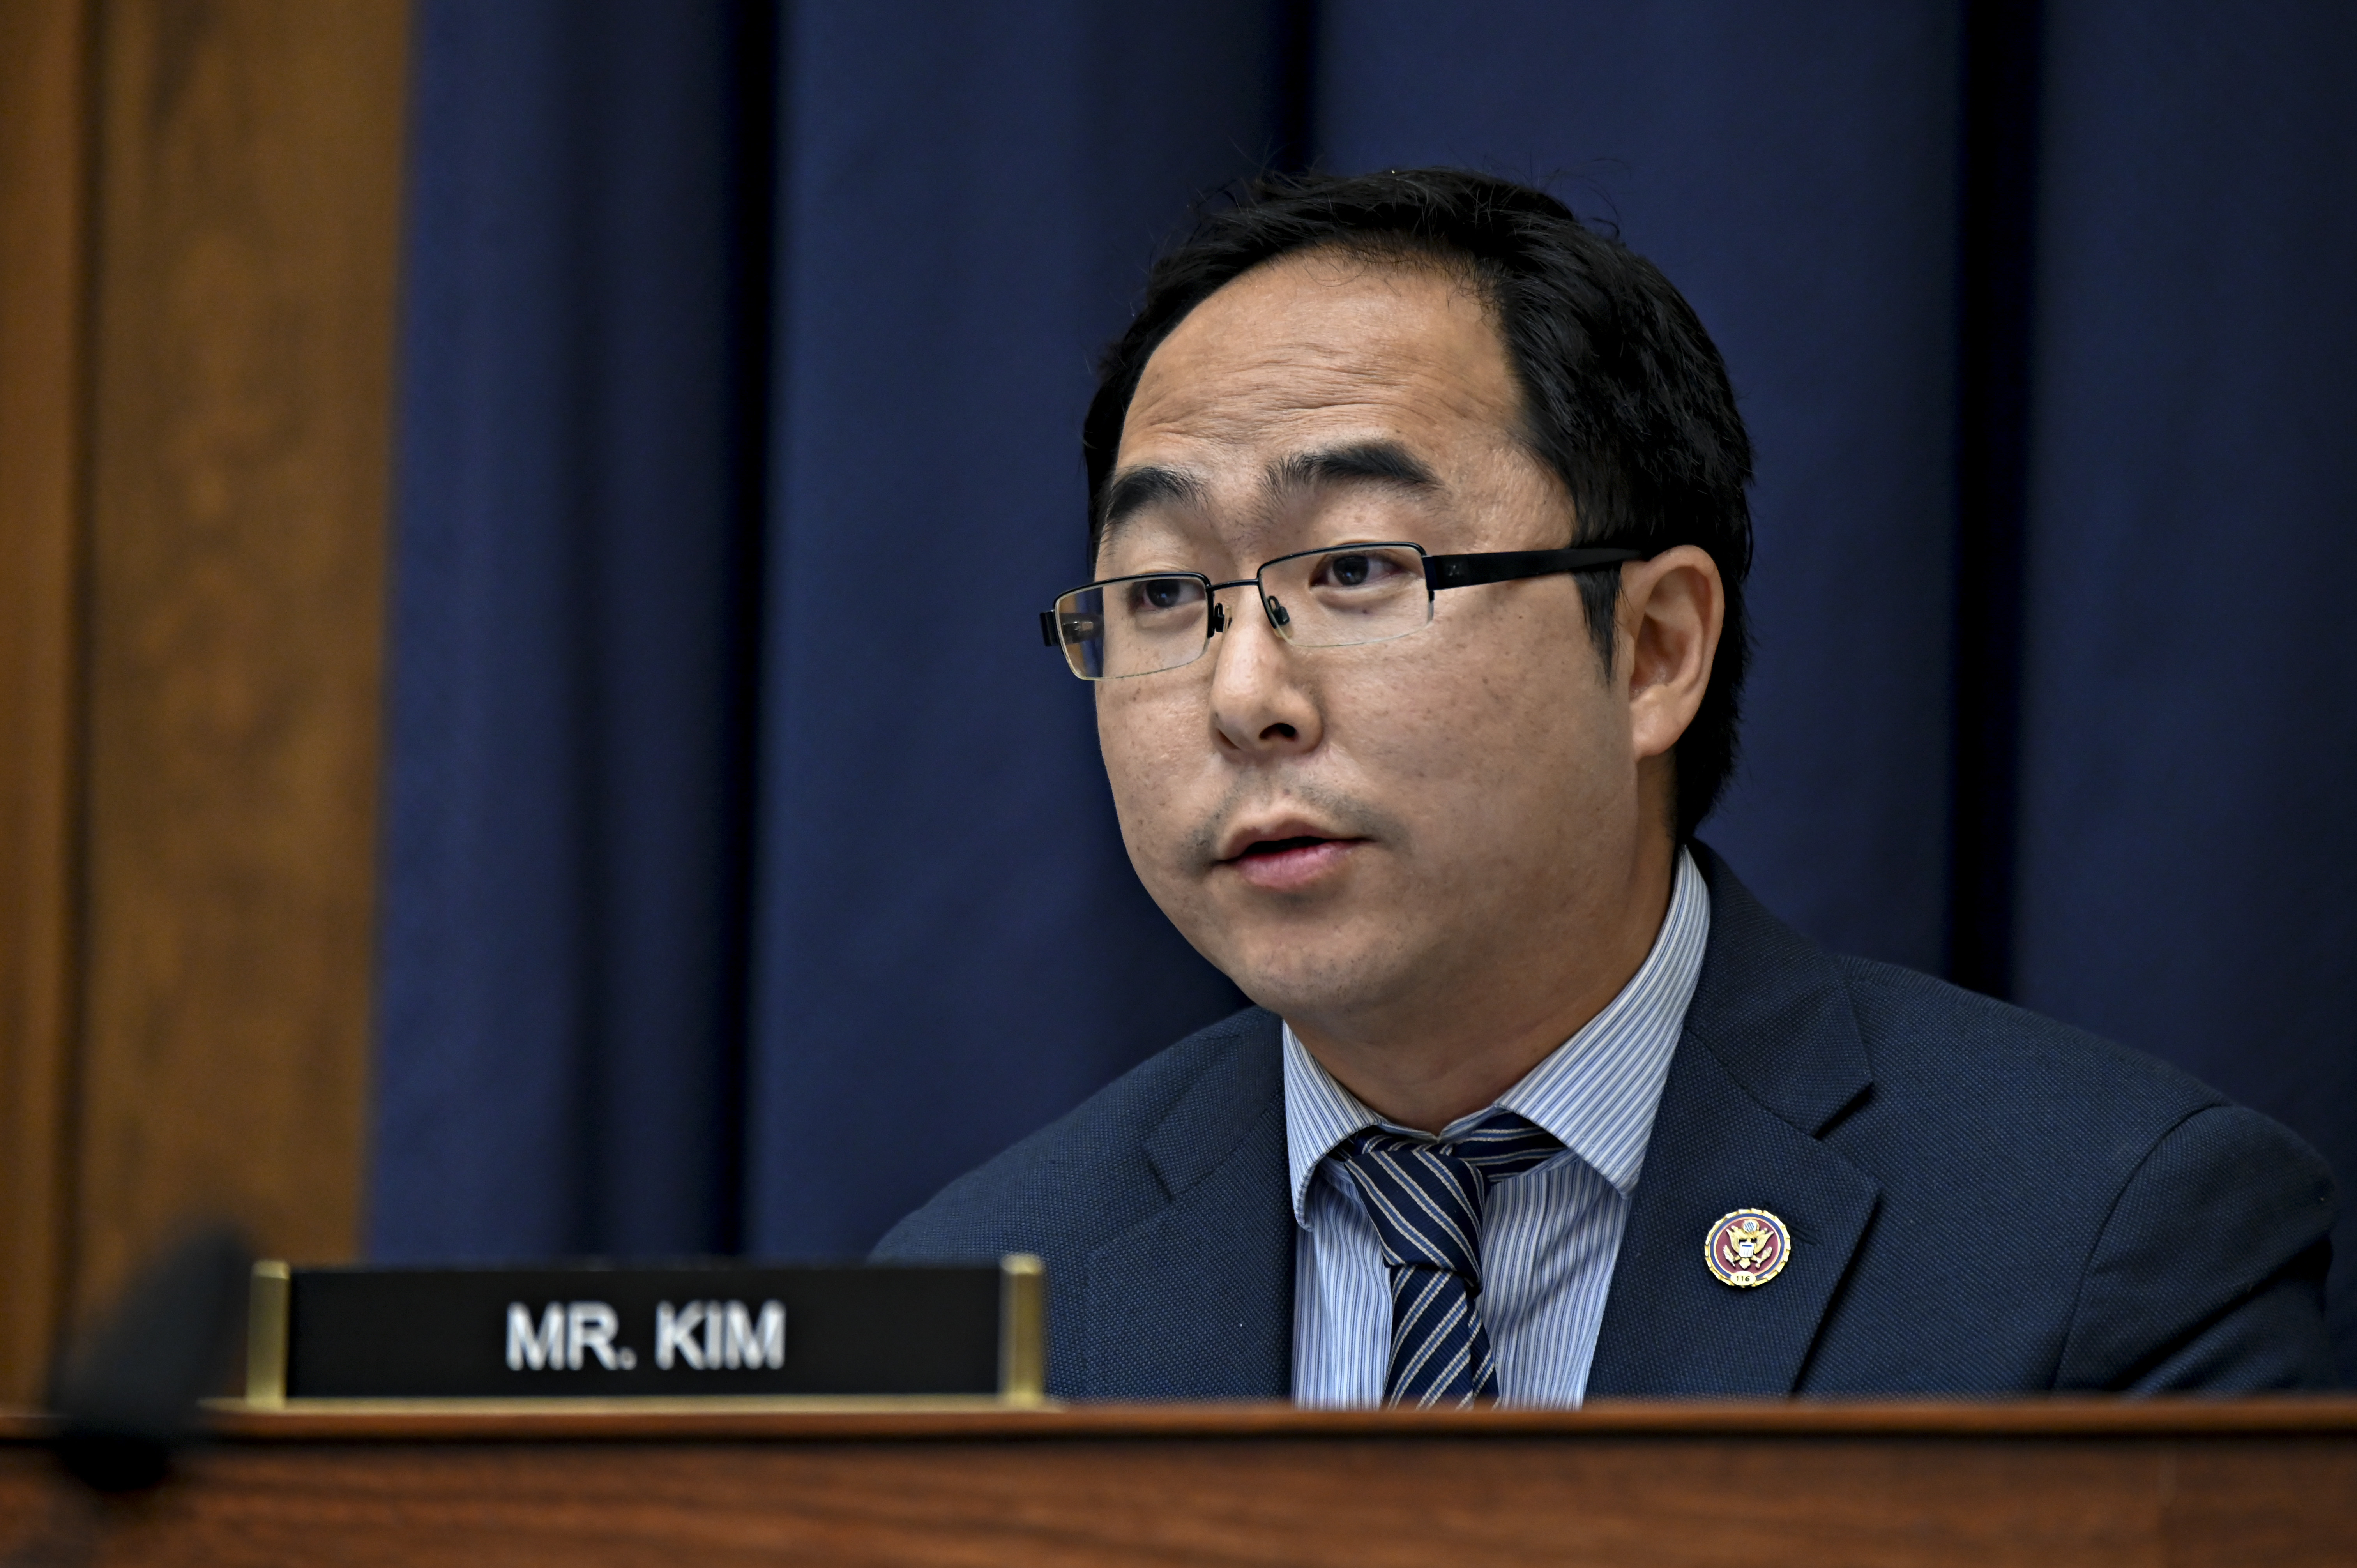 Rep. Andy Kim speaks during a House Small Business Committee hearing in Washington, D.C., U.S., on Friday, July 17, 2020.